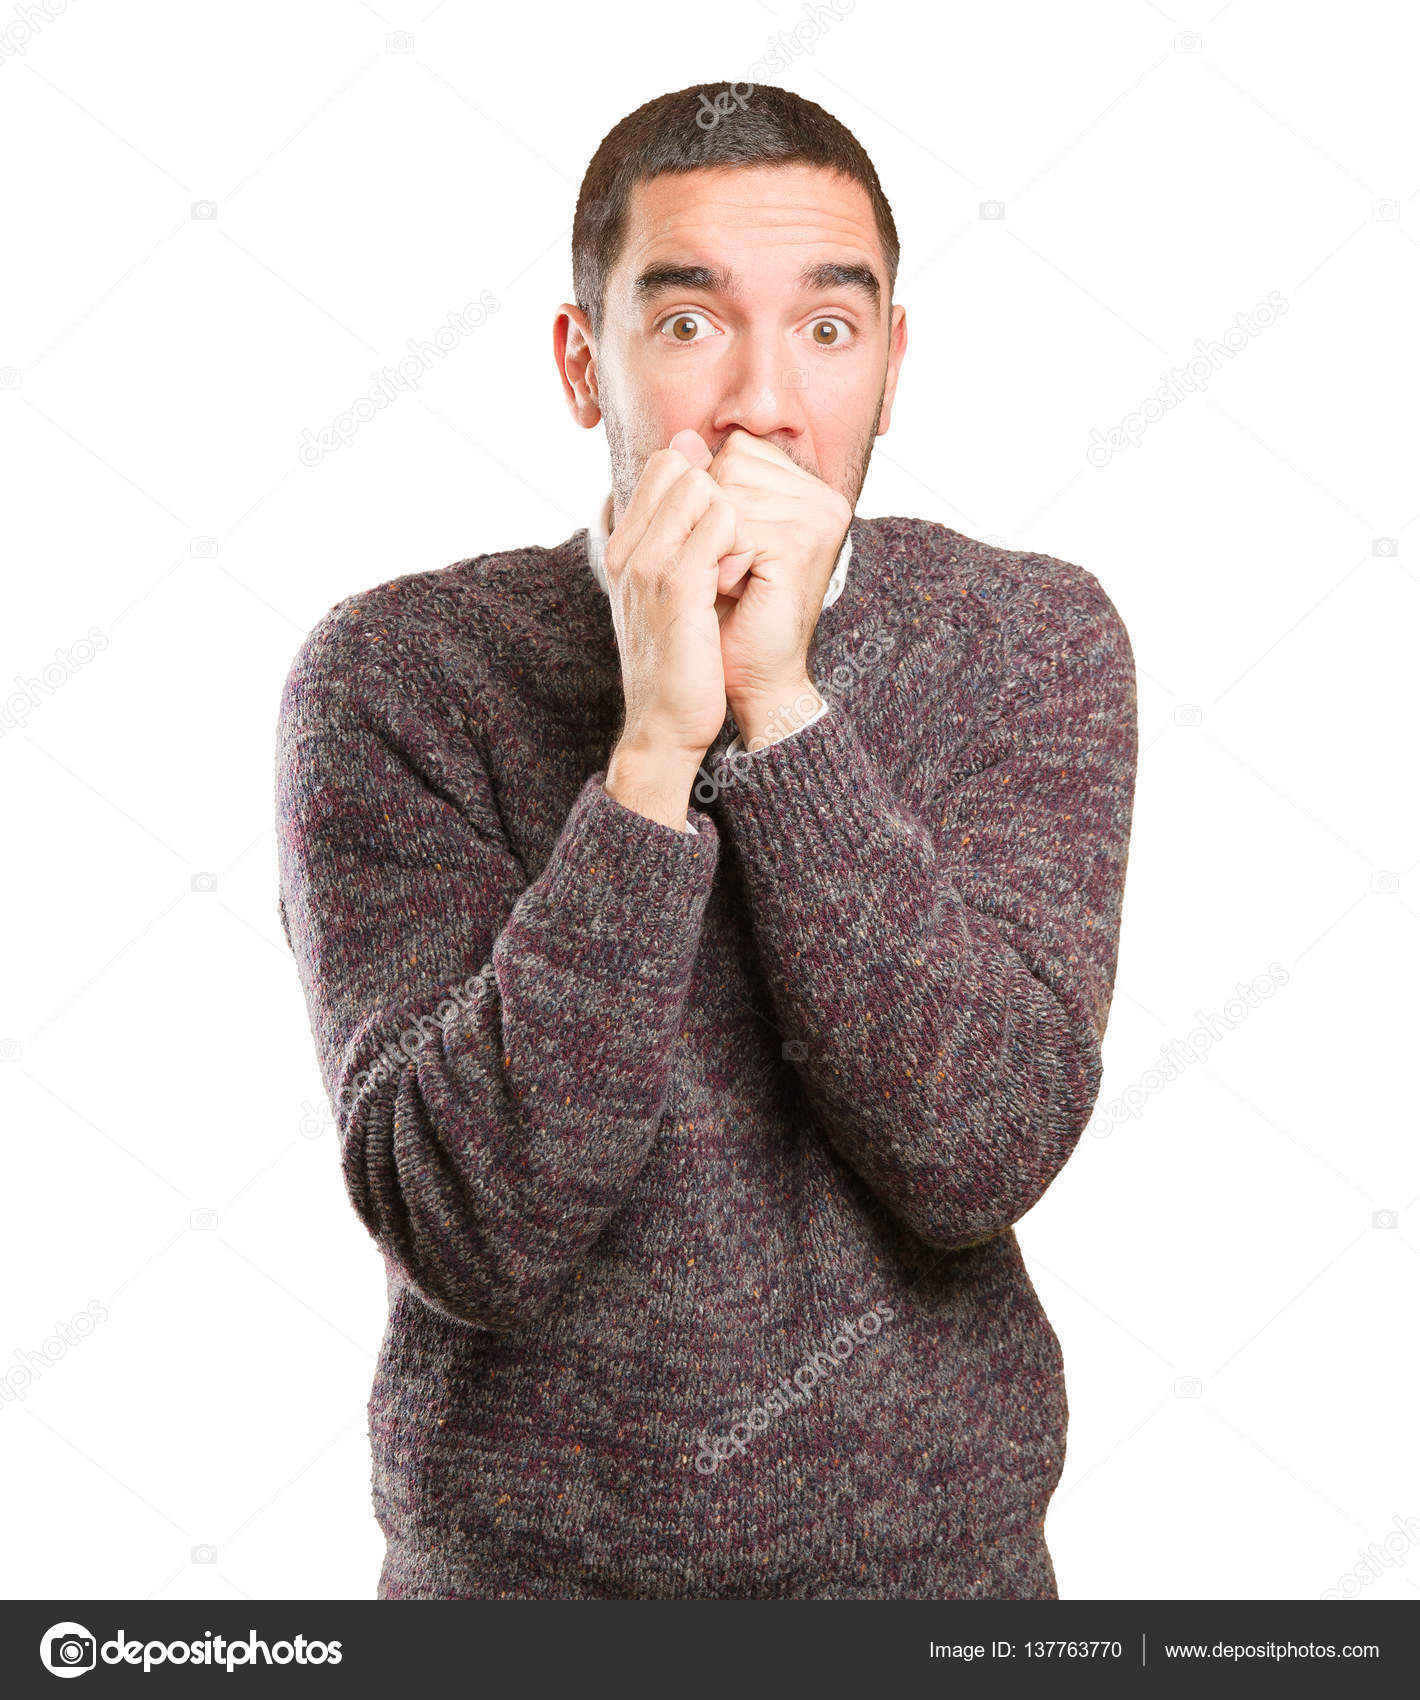 Scared young man posing — Stock Photo © agongallud #137763770